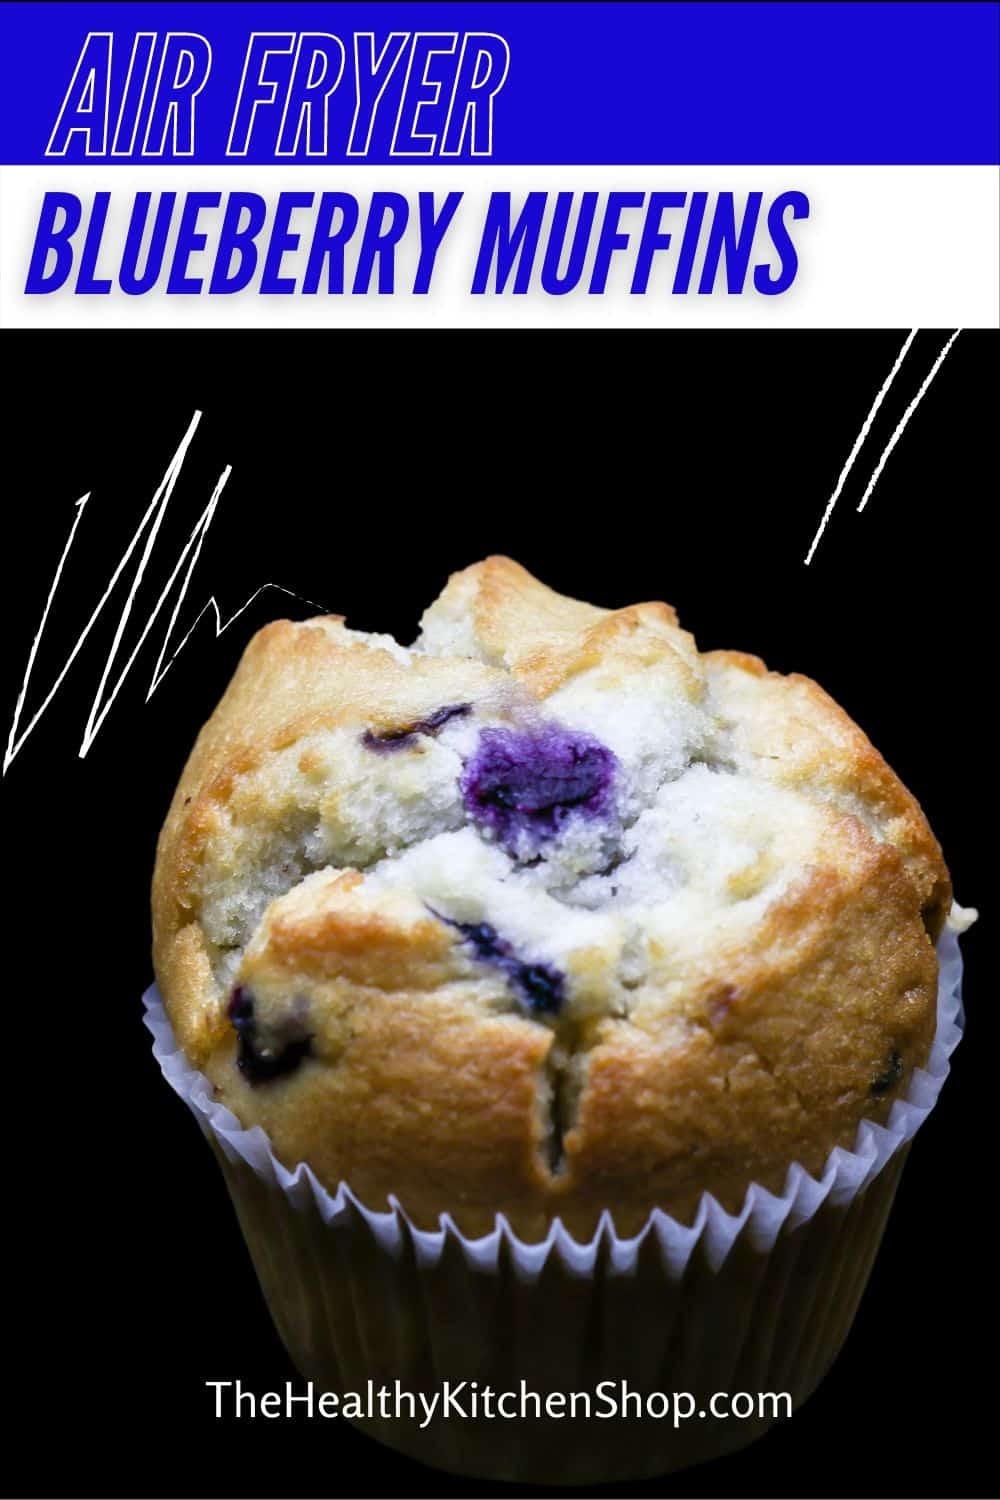 Air Fryer Blueberry Muffins - TheHealthyKitchenShop.com